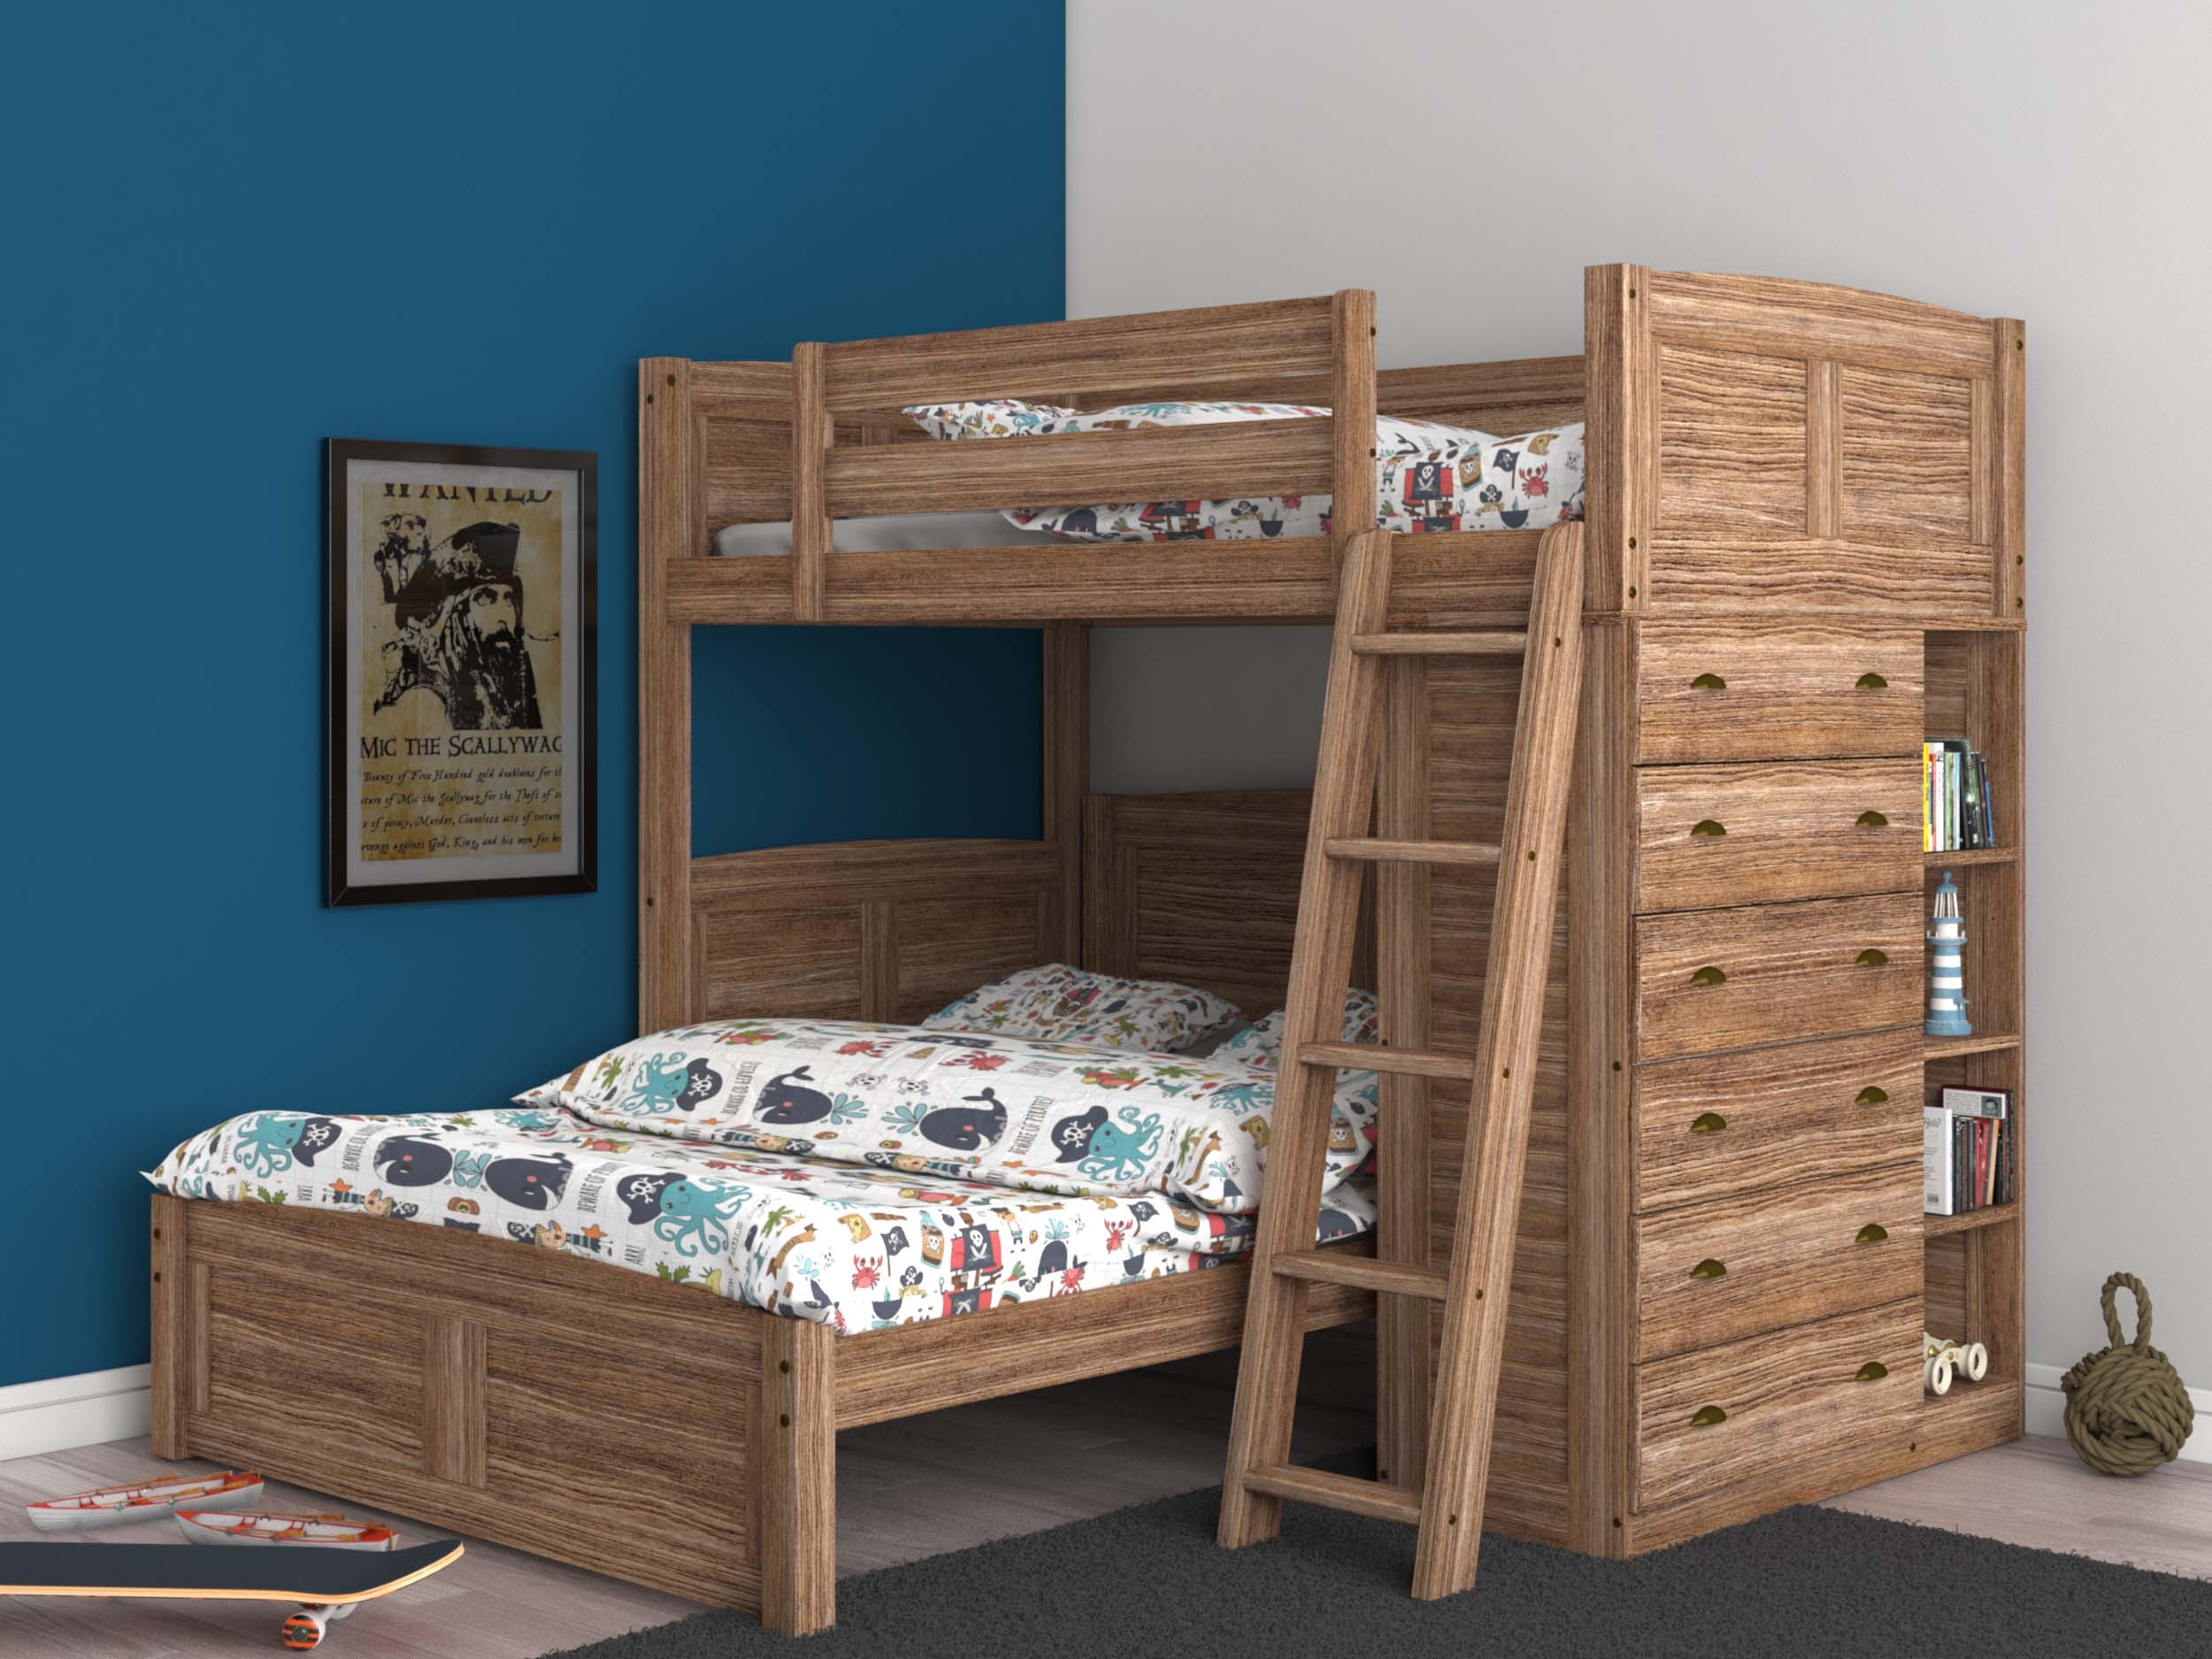 Bunk Beds With Dressers Visualhunt, Bunk Bed Sets With Dresser